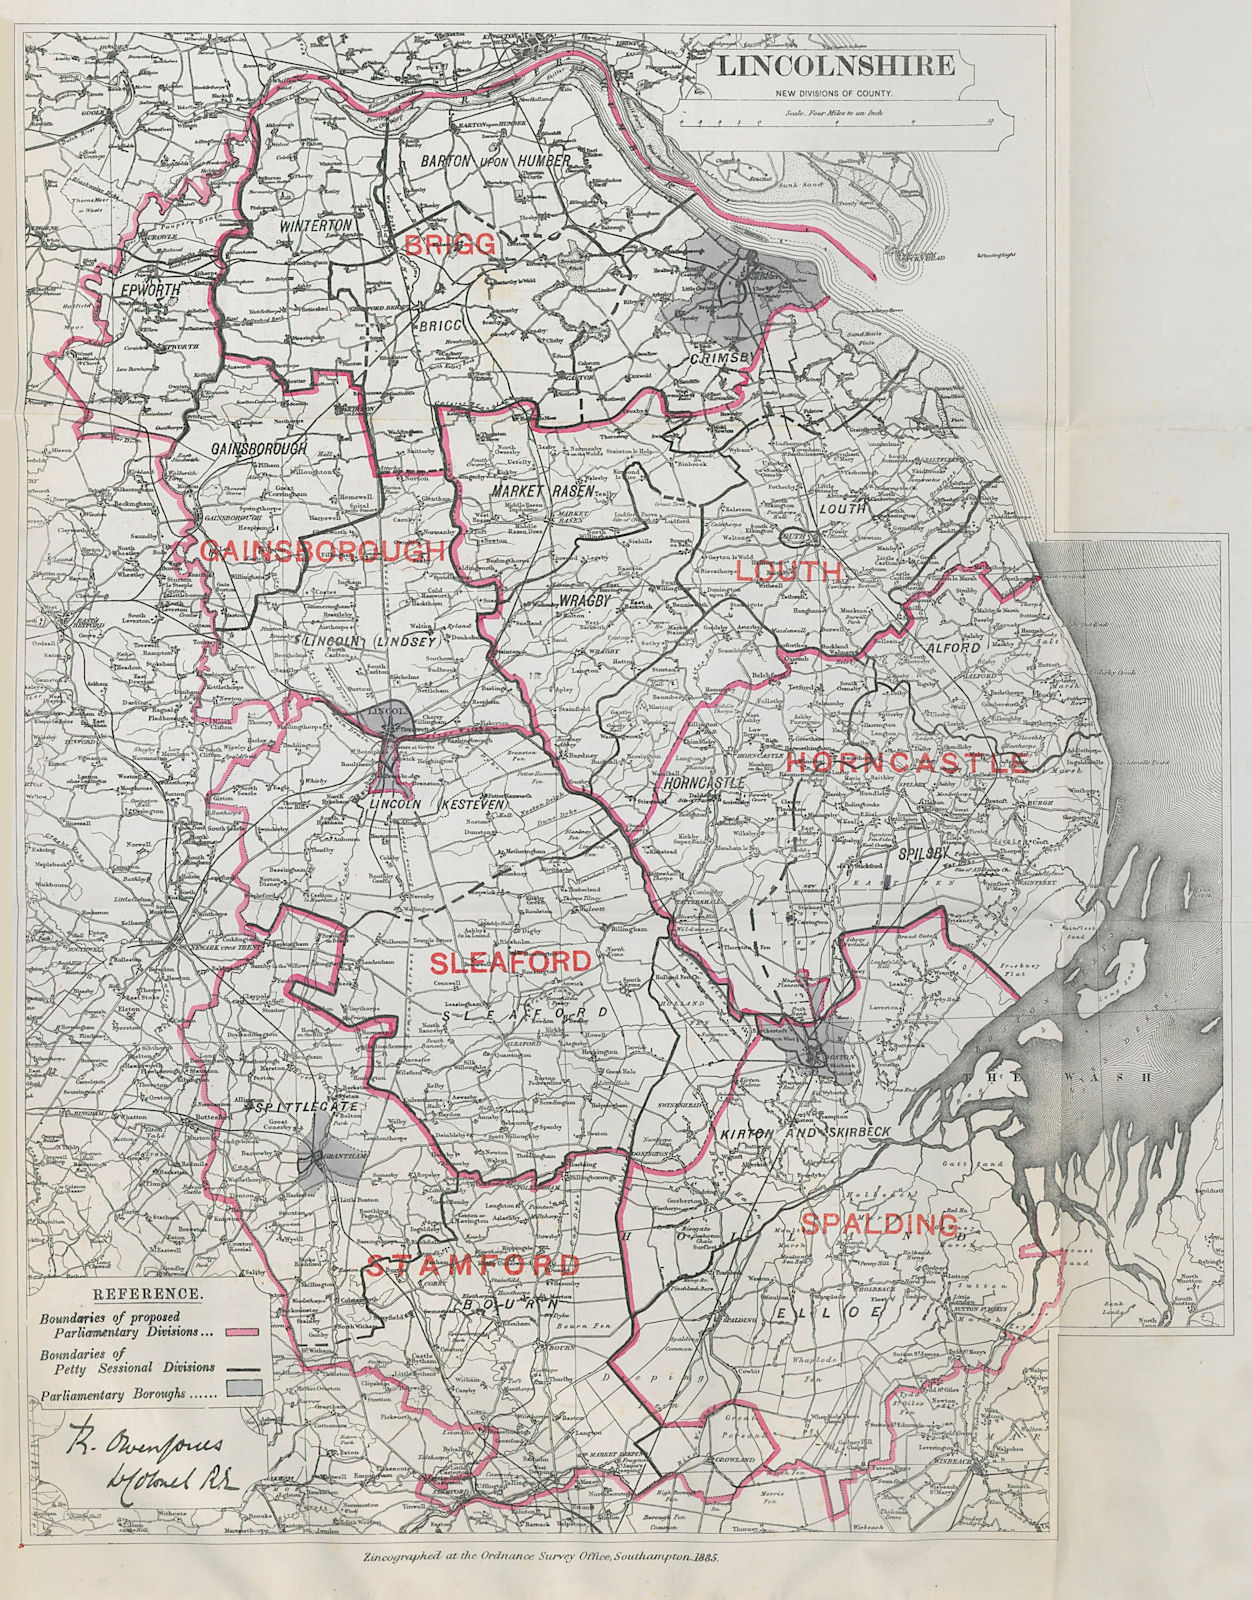 Associate Product Lincolnshire Parliamentary Divisions. Sleaford. BOUNDARY COMMISSION 1885 map